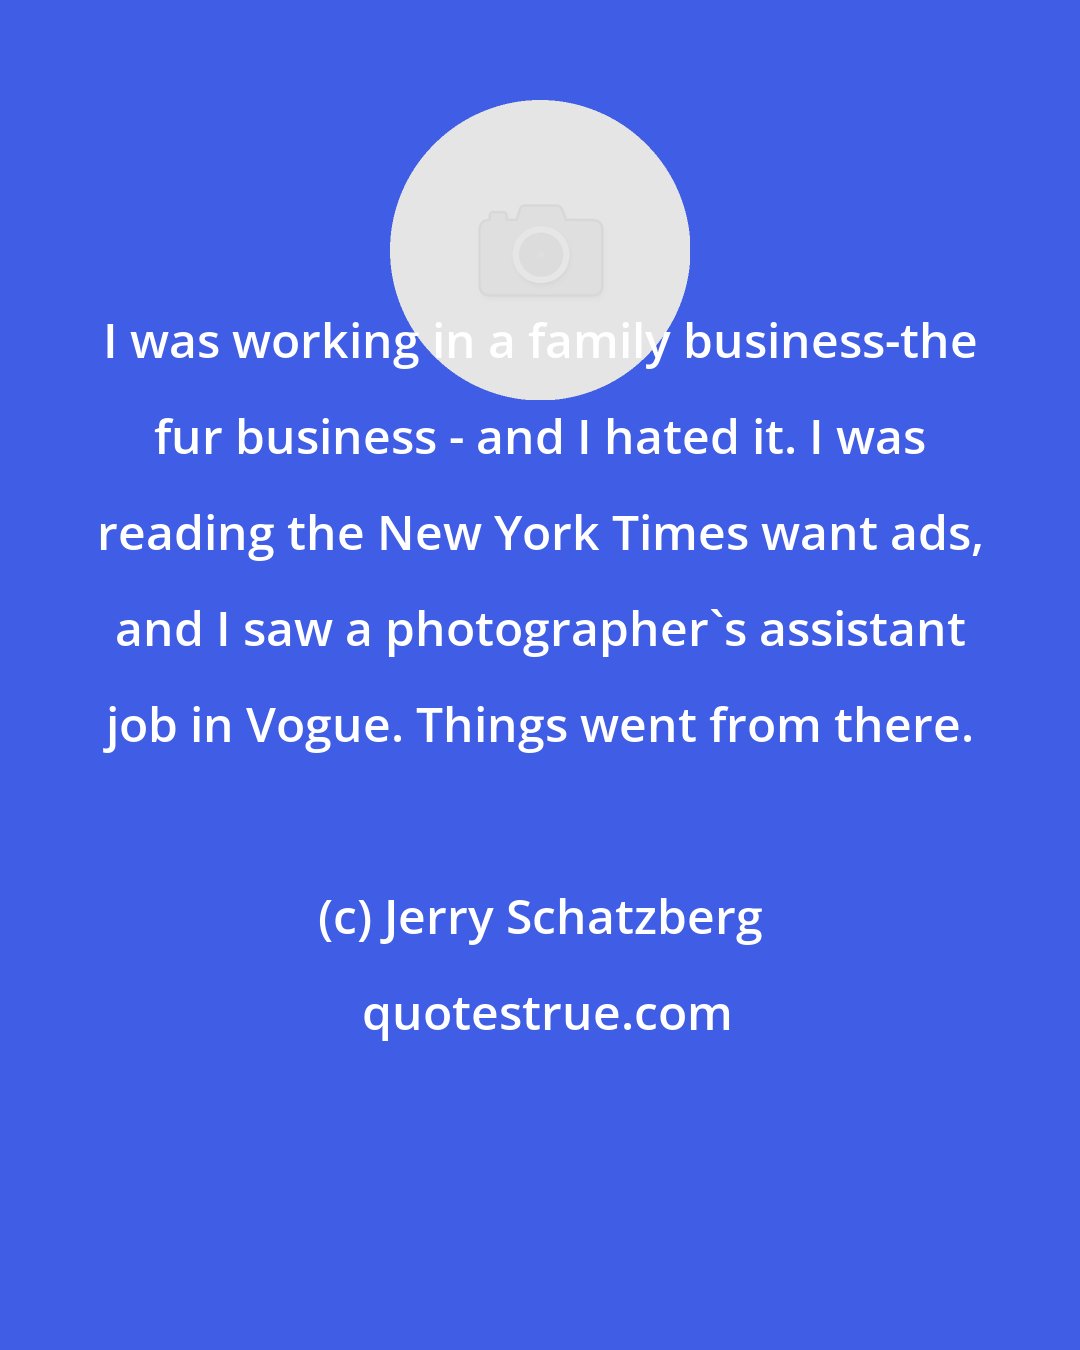 Jerry Schatzberg: I was working in a family business-the fur business - and I hated it. I was reading the New York Times want ads, and I saw a photographer's assistant job in Vogue. Things went from there.